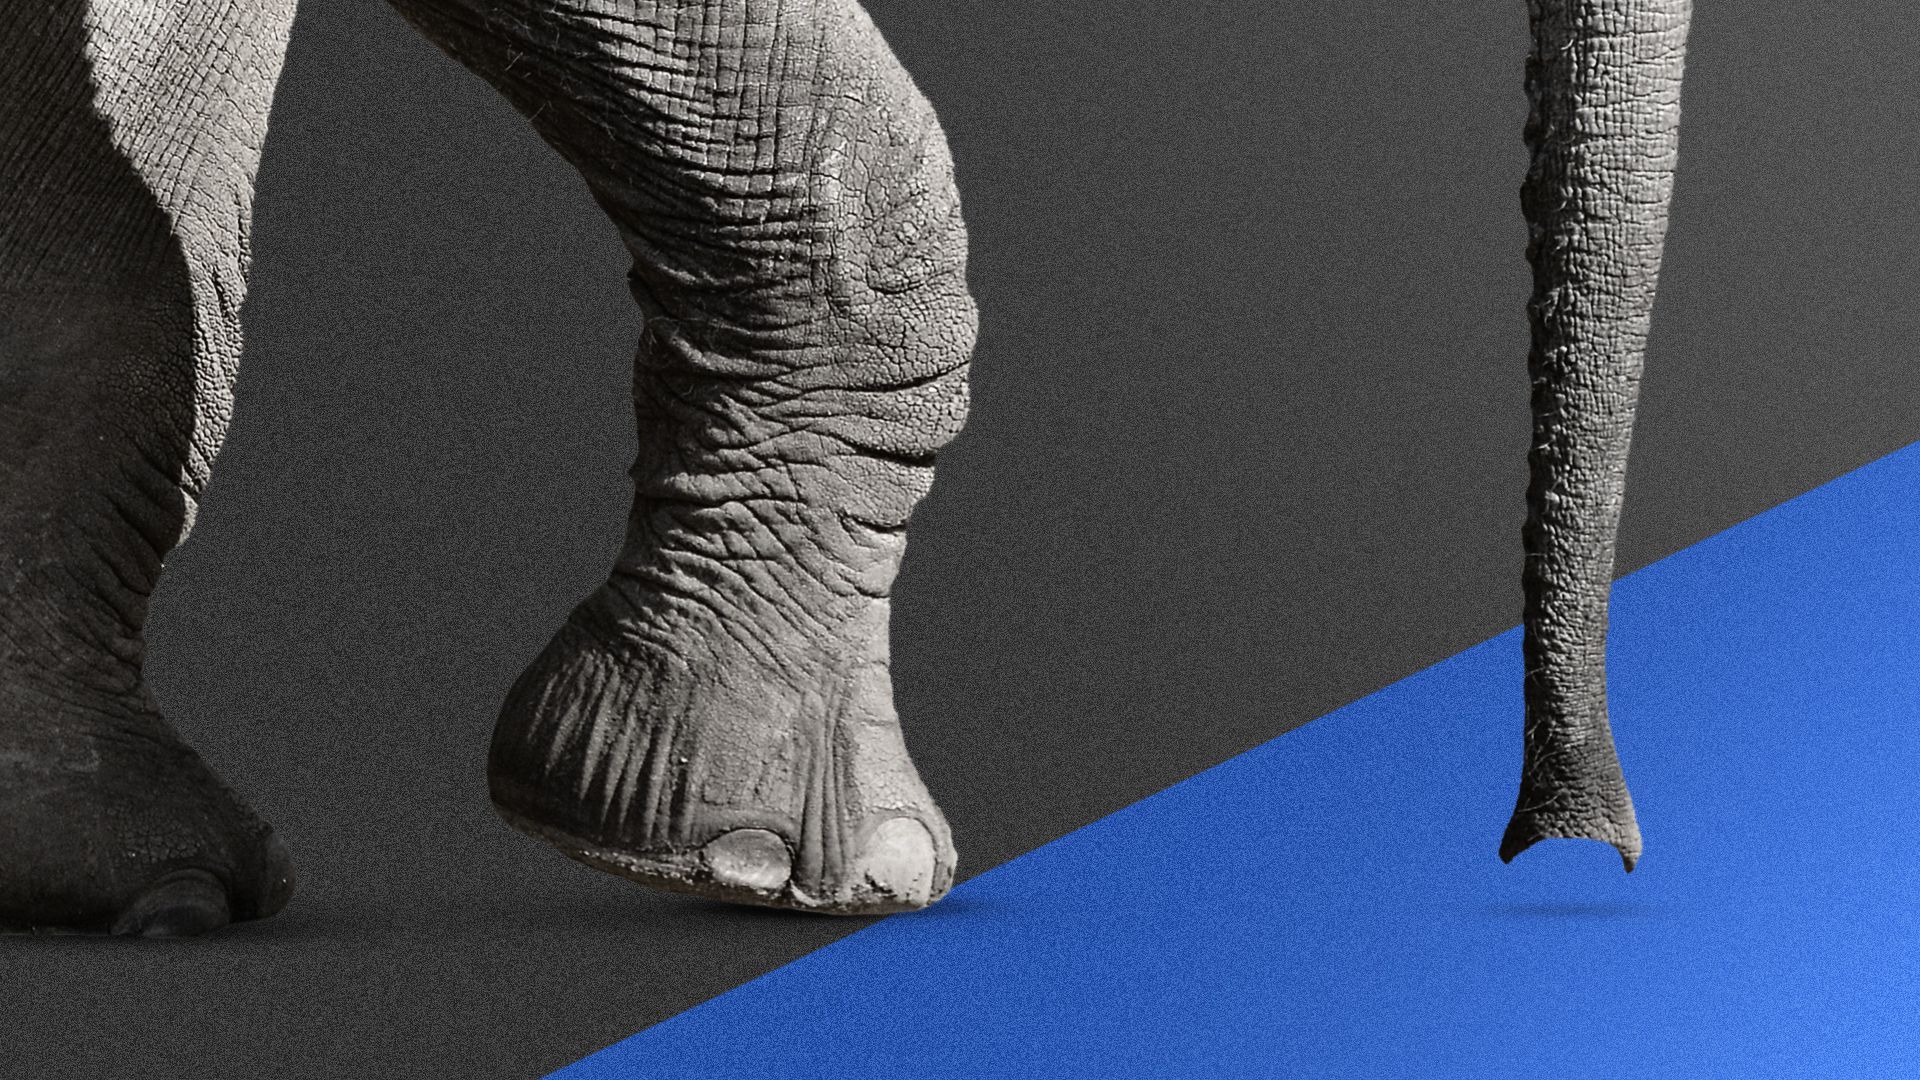 Illustration of an elephant toeing a blue line